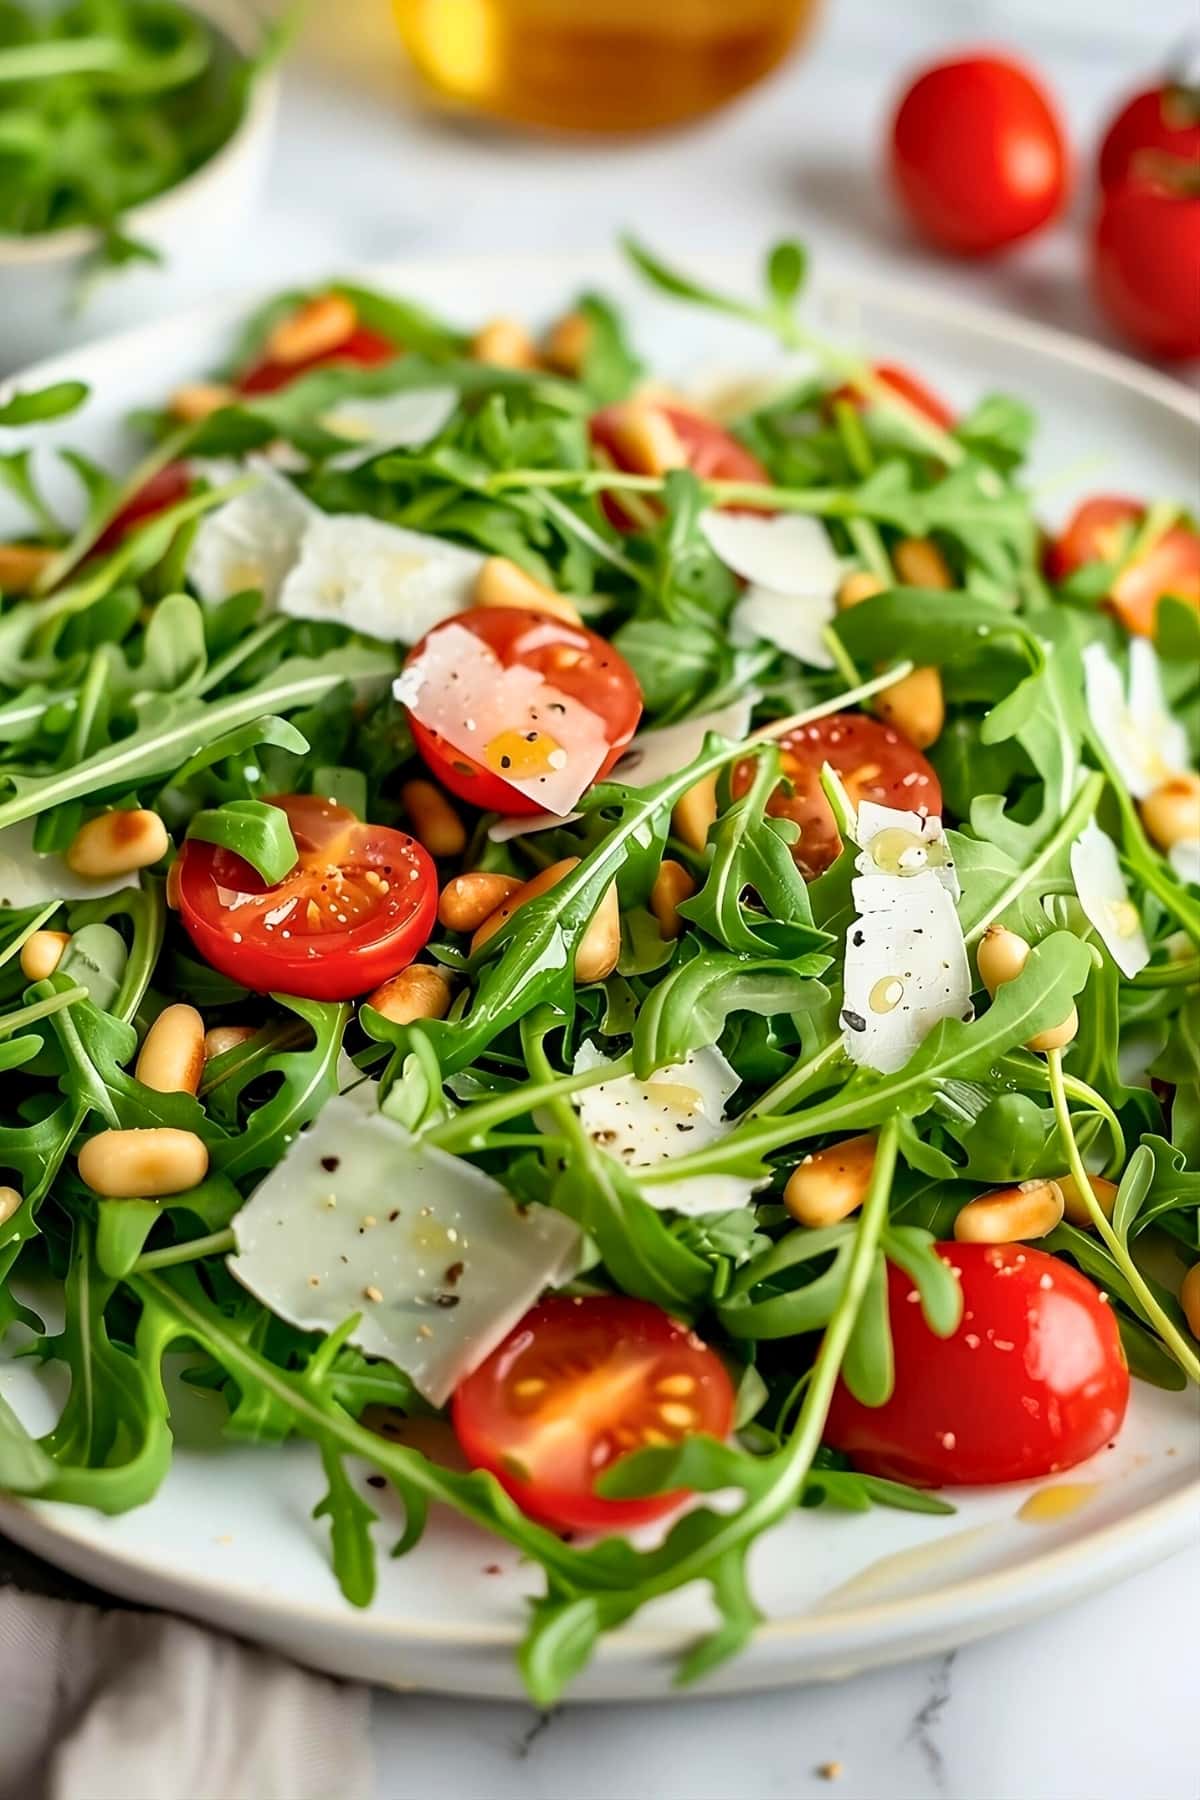 Arugula salad served on a white plate with cherry tomatoes, nuts and fresh arugula drizzled with lemon dressing.